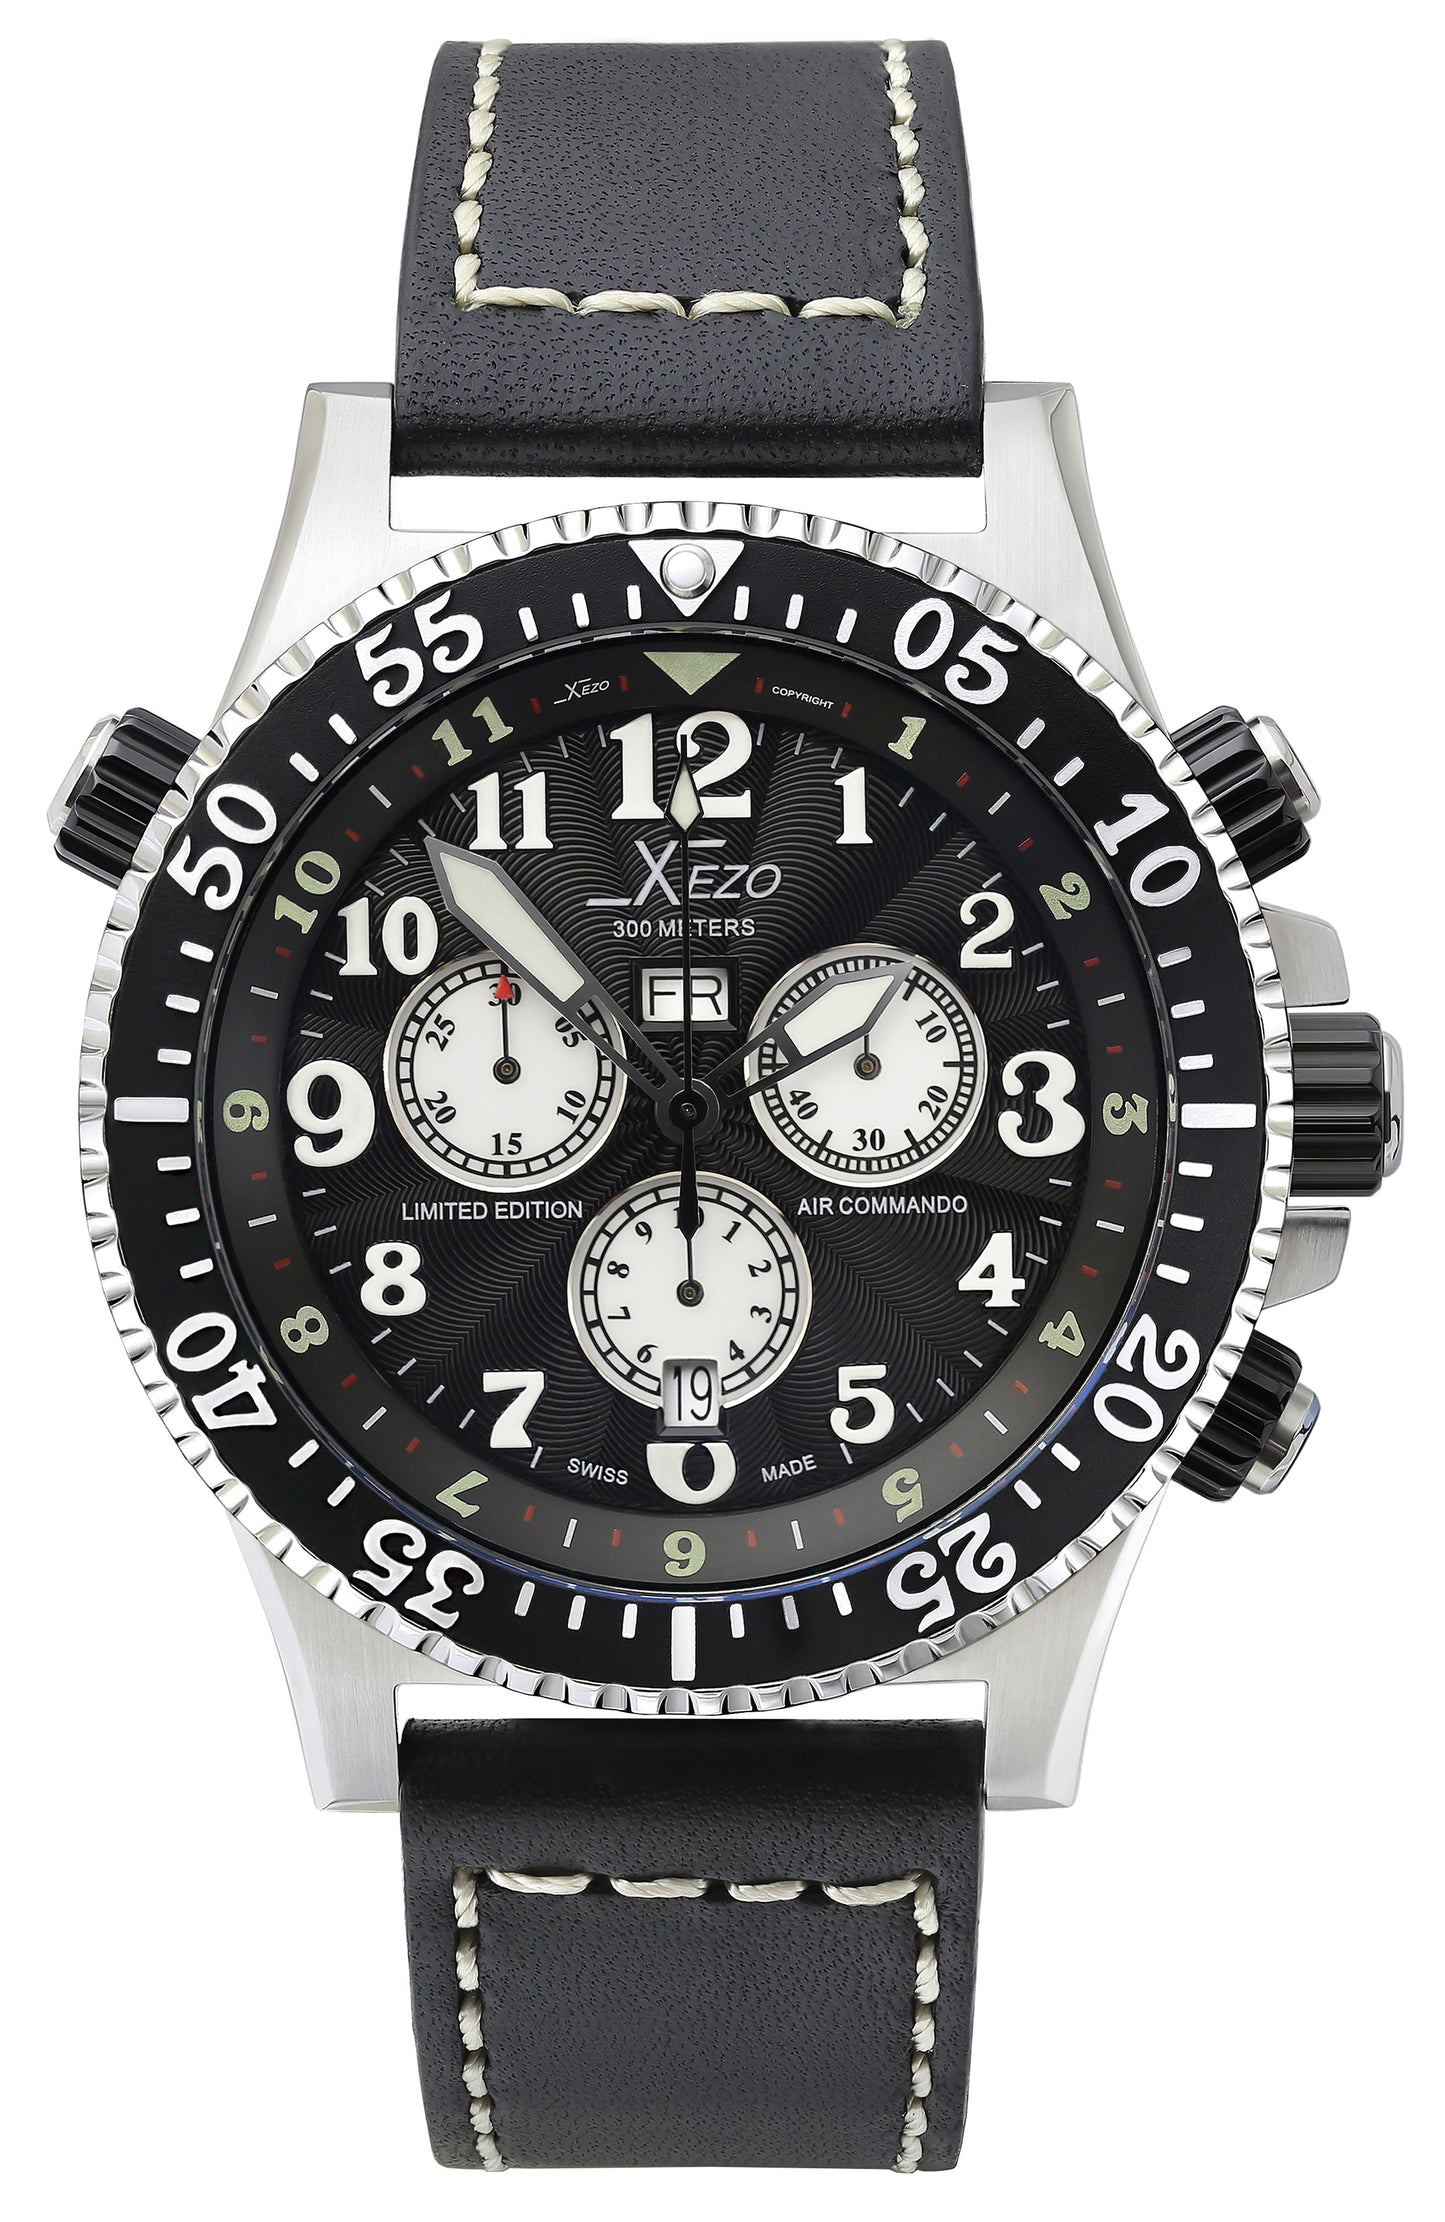 Xezo - Front view of the Air Commando D45-GS-L watch with black leather strap